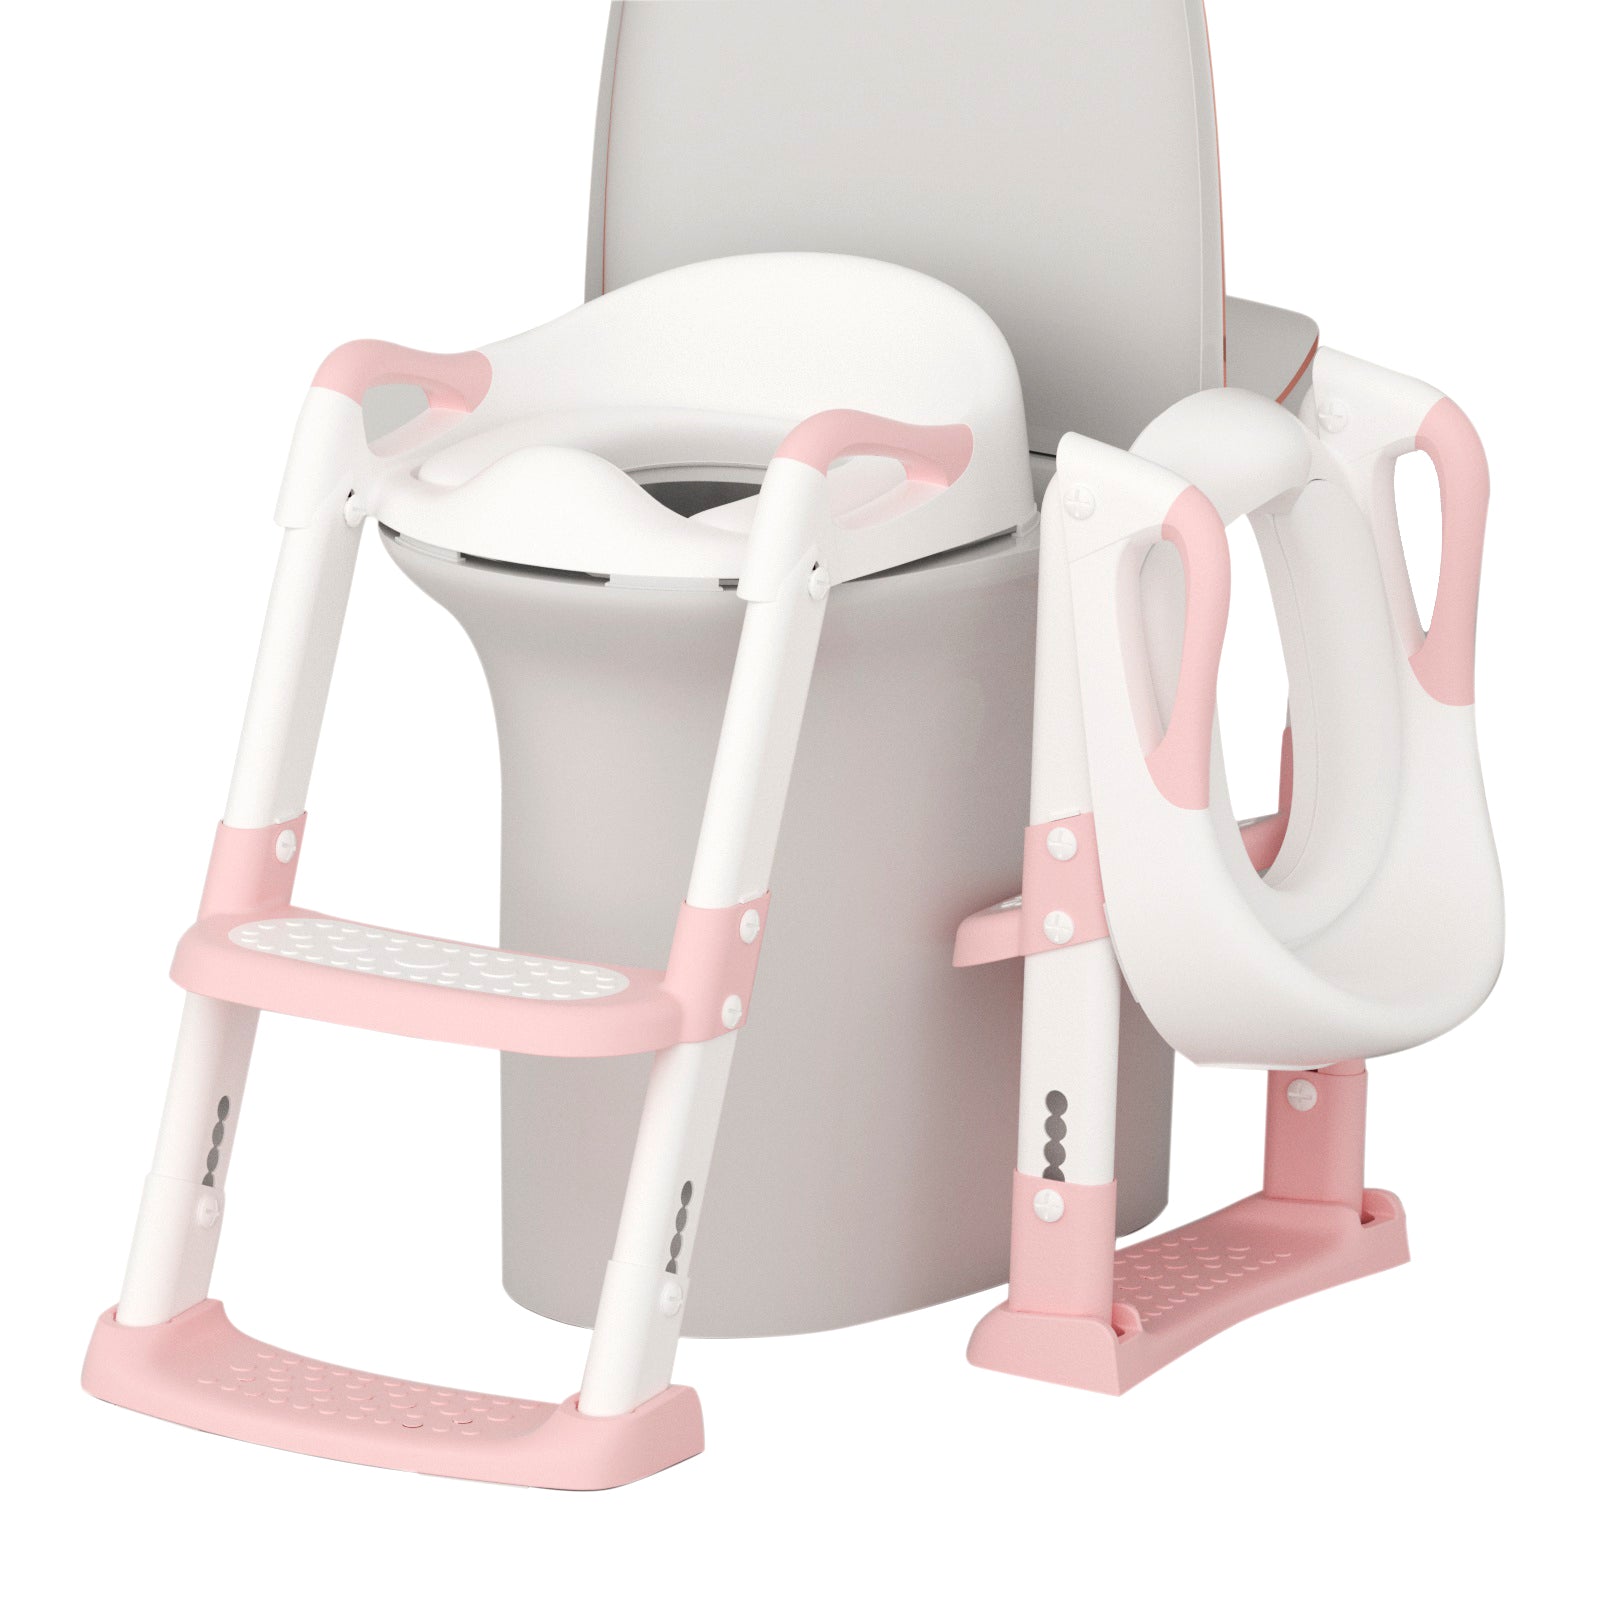 XJD Kids Toilet Training Seat with Step Ladder Pink - XJD